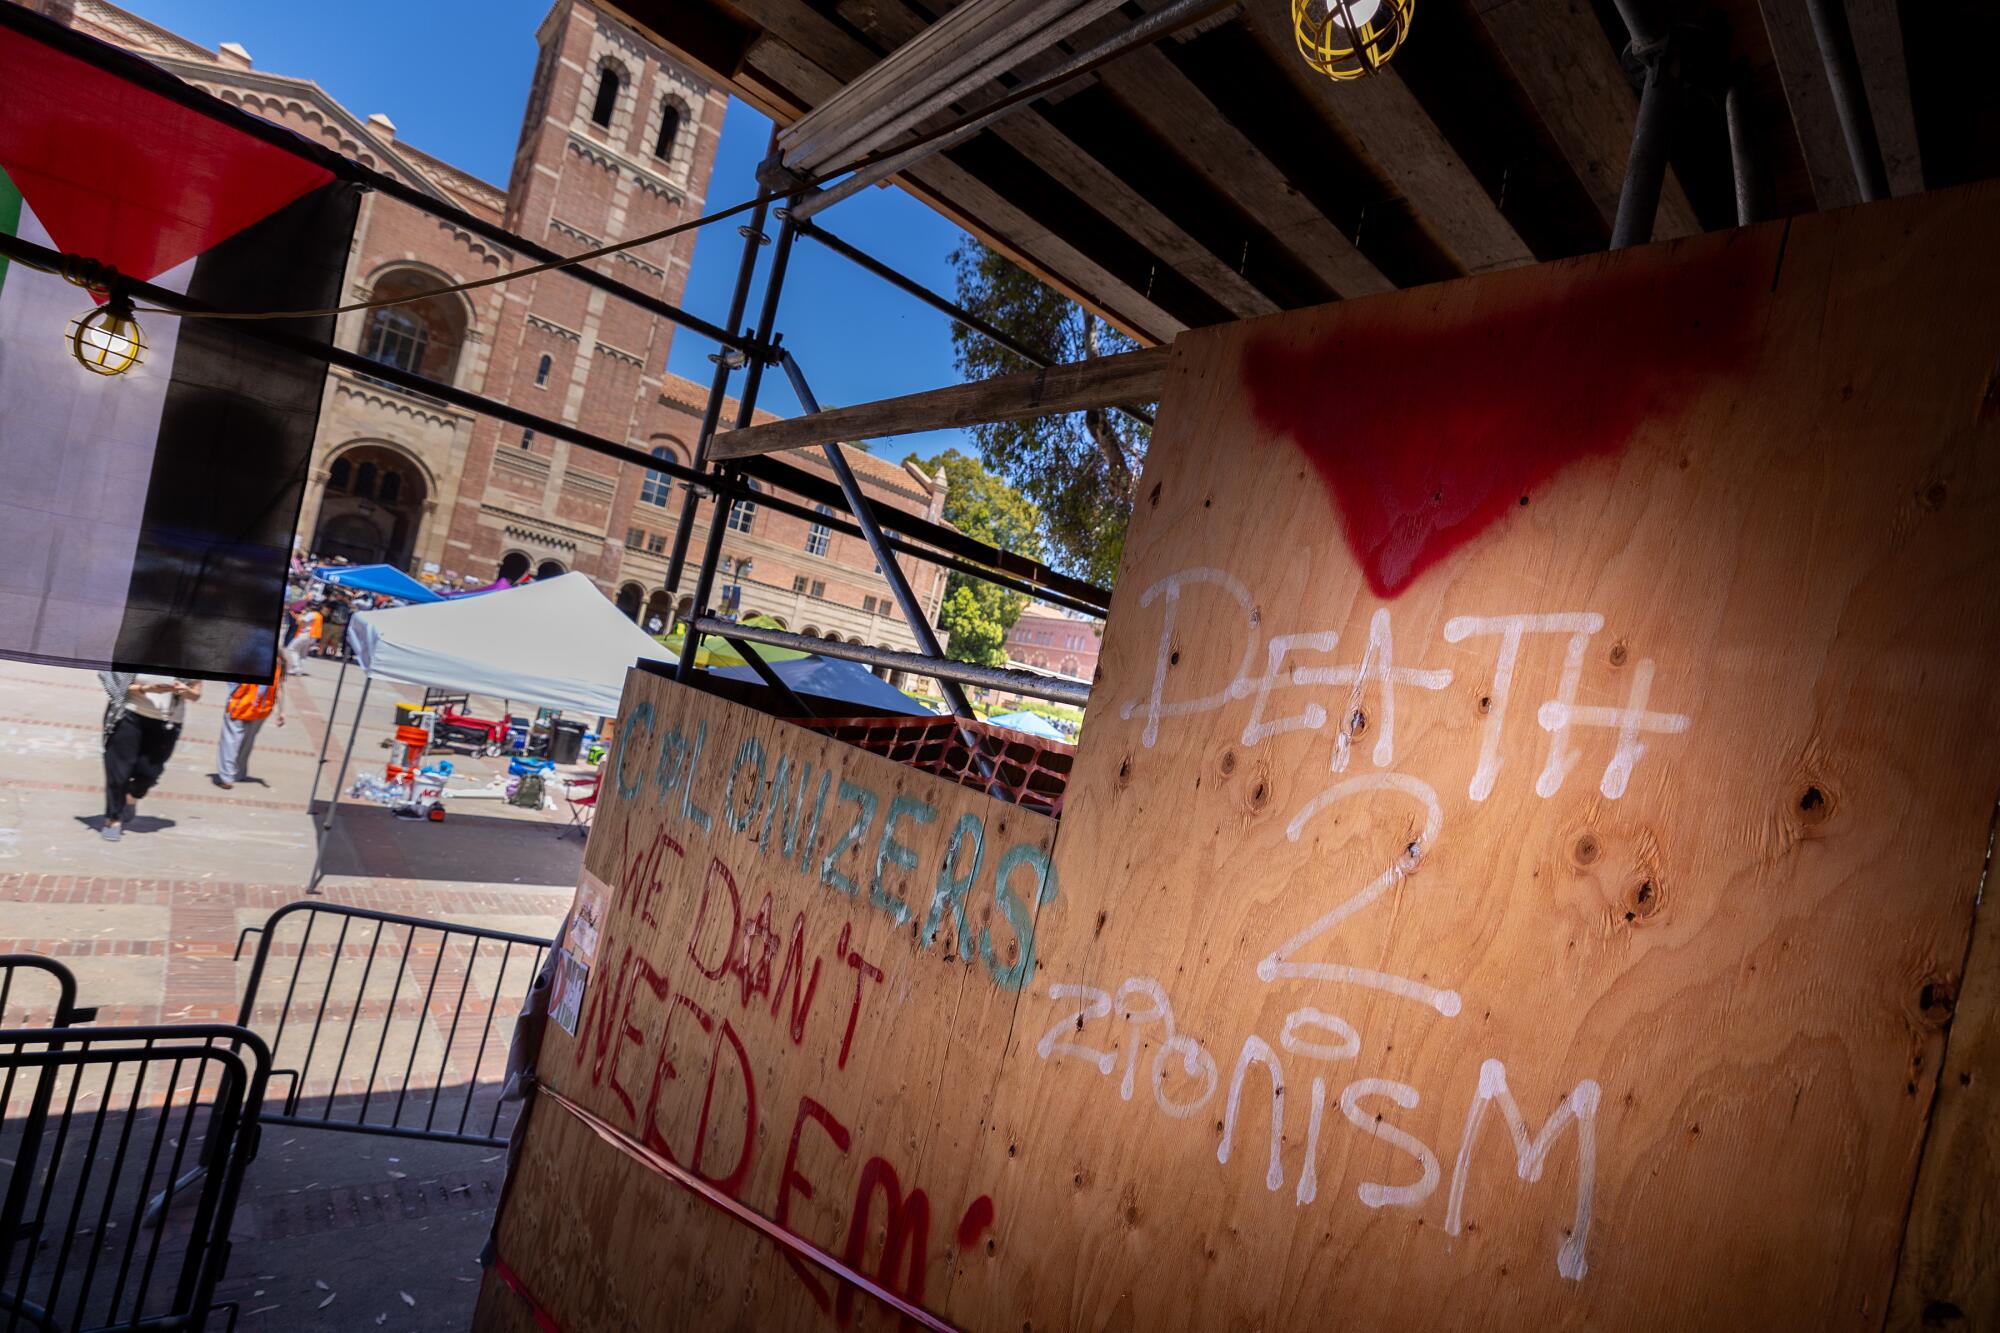 Wood panels near UCLA's Powell Library have graffiti with an inverted red triangle and the words "Death 2 Zionism"